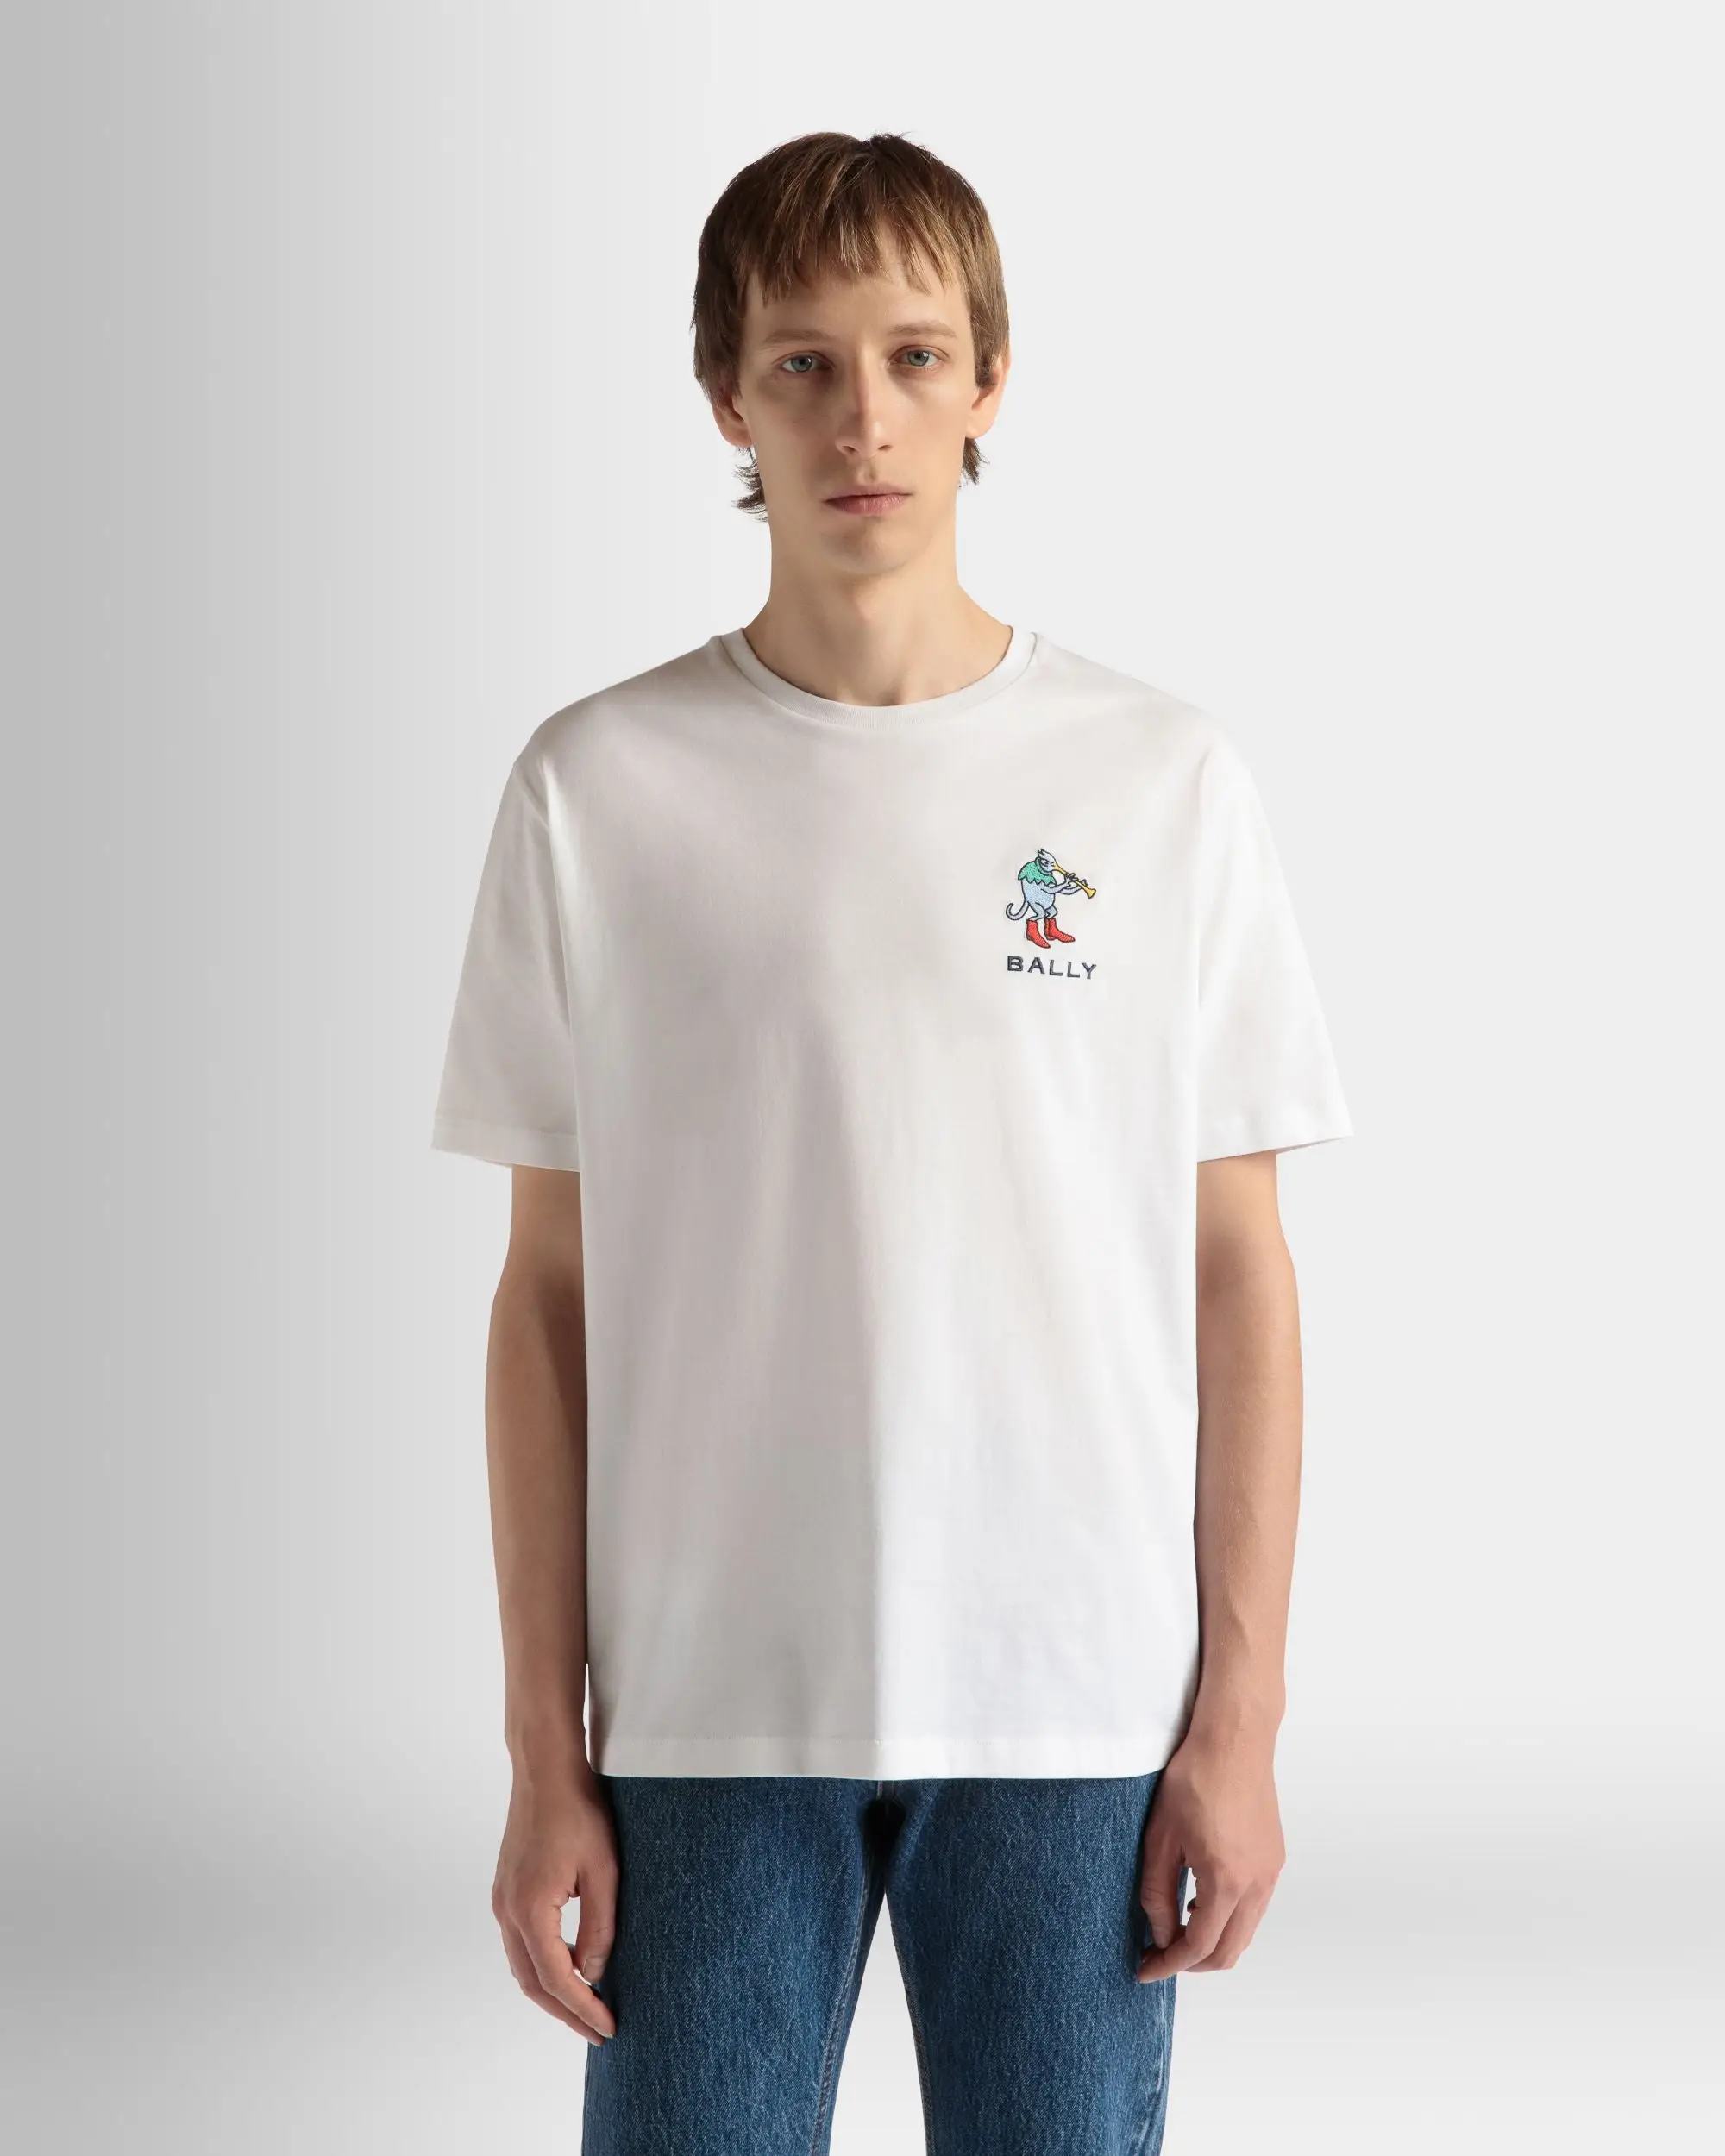 T-Shirt in White Cotton